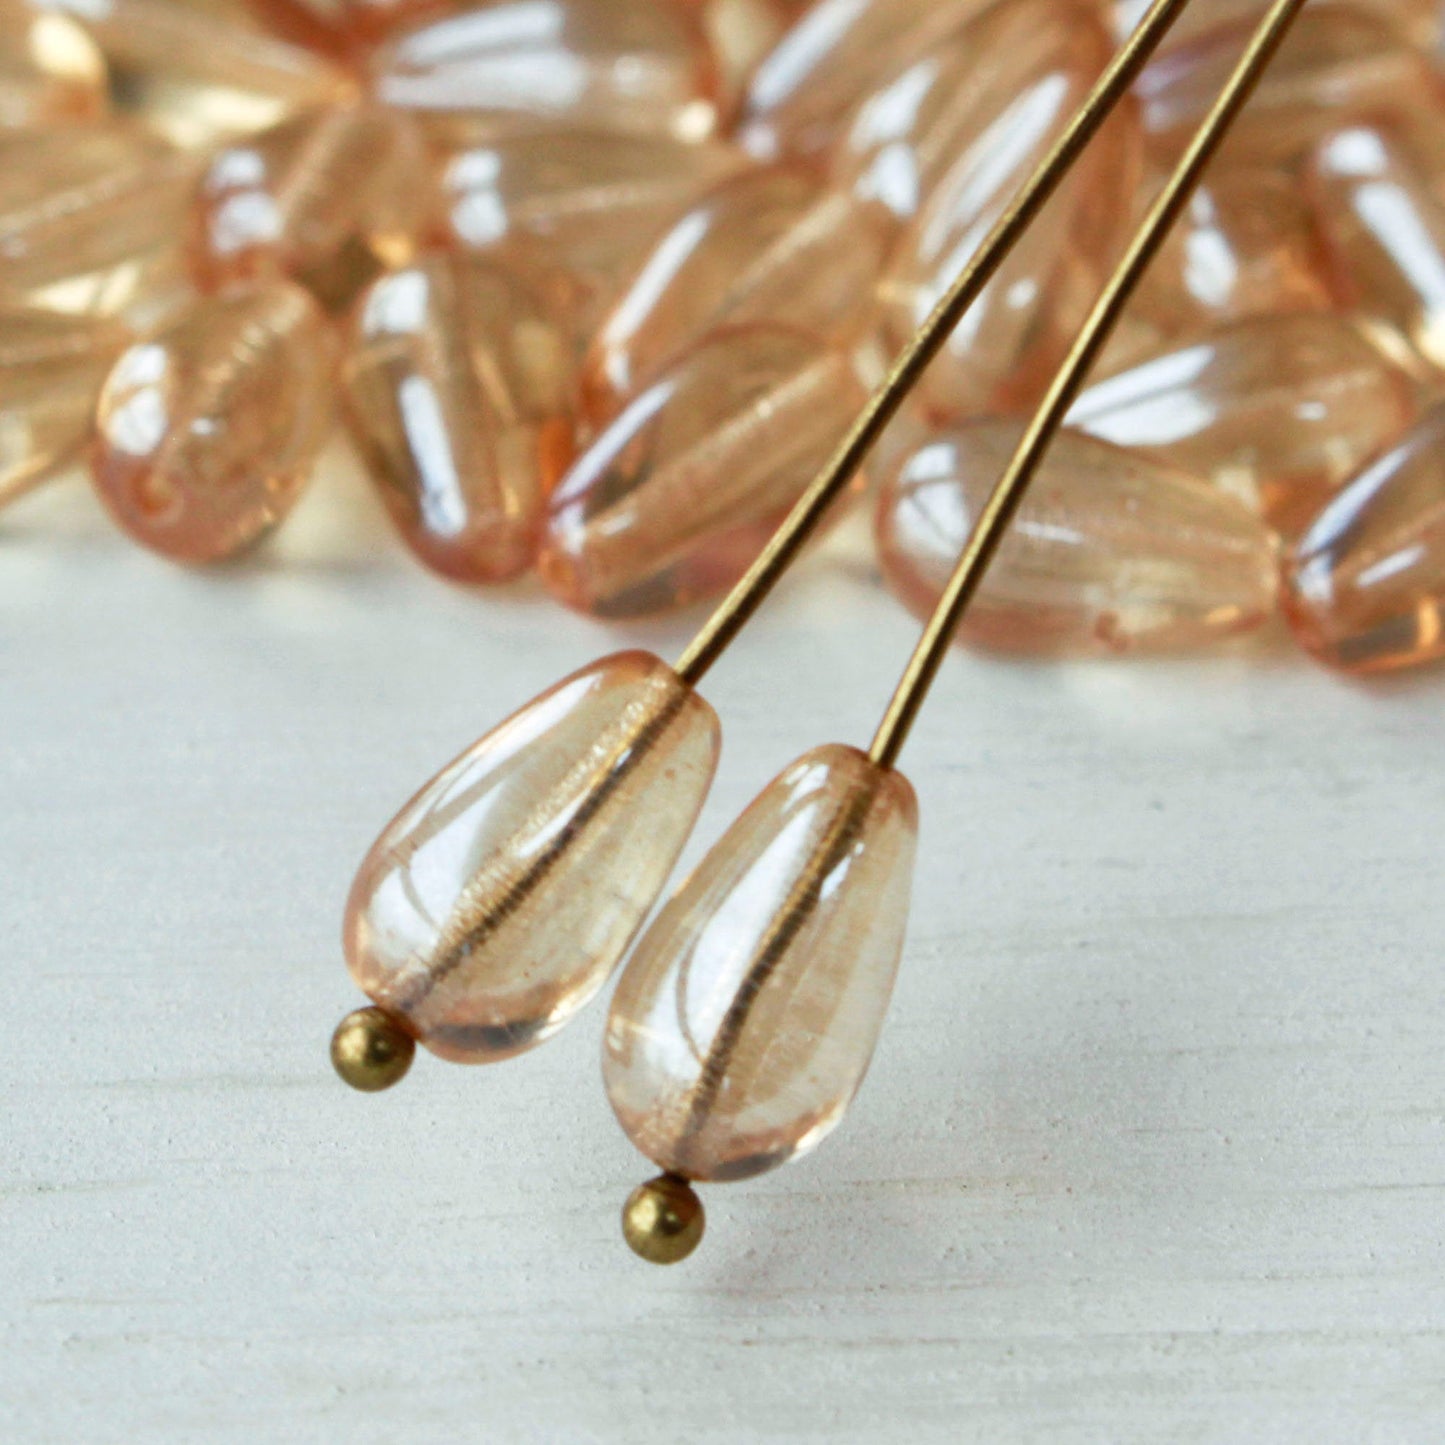 6x10mm Long Drill Teardrop Beads - Champagne Luster - 50 Beads